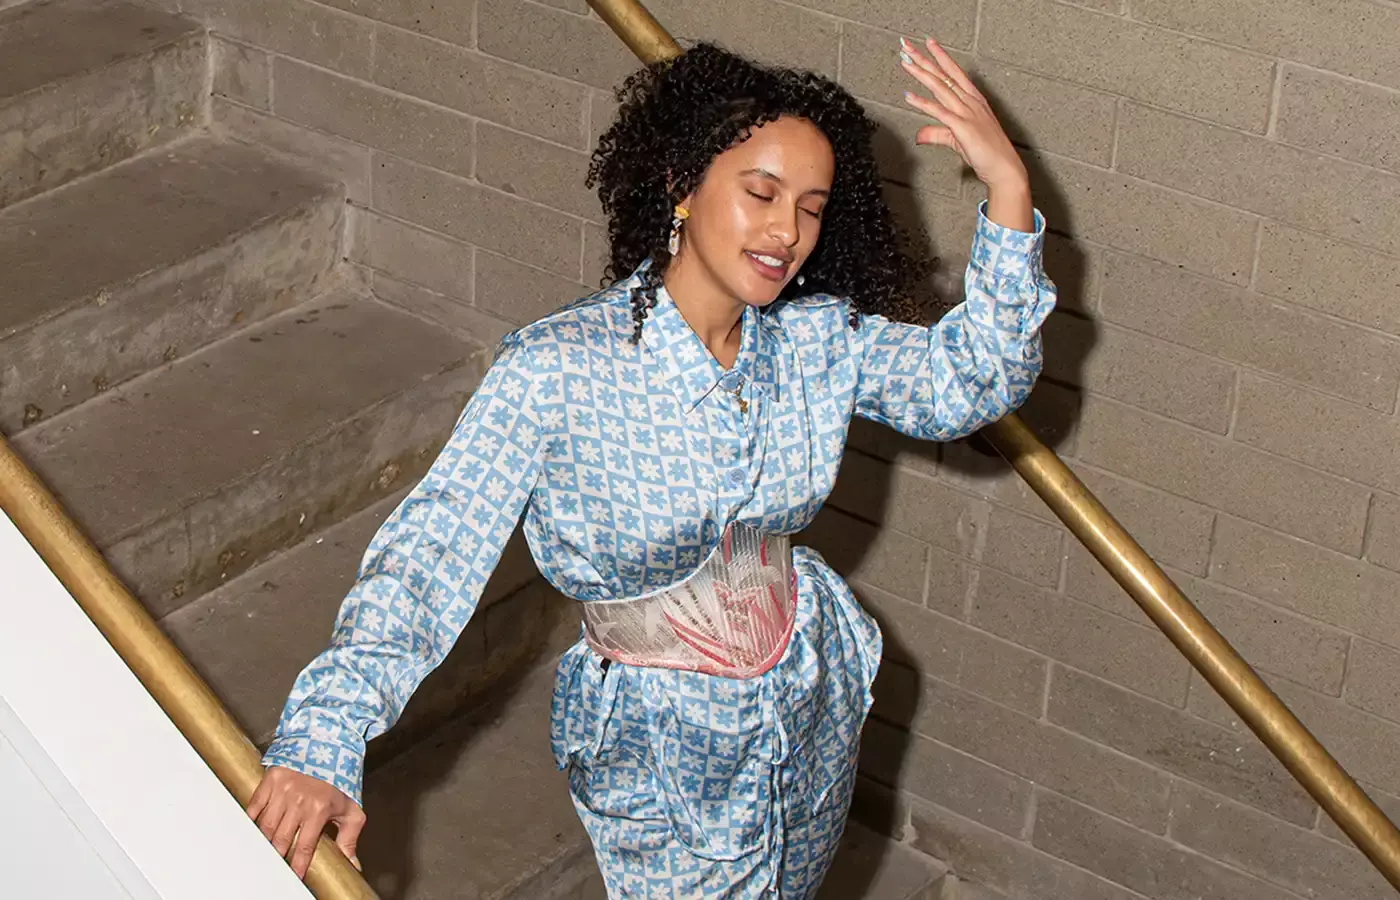 Kalei is spearheading the local fashion movement through her organization Salt Lake Fashion Collective, an inclusive as a space for creatives to connect.